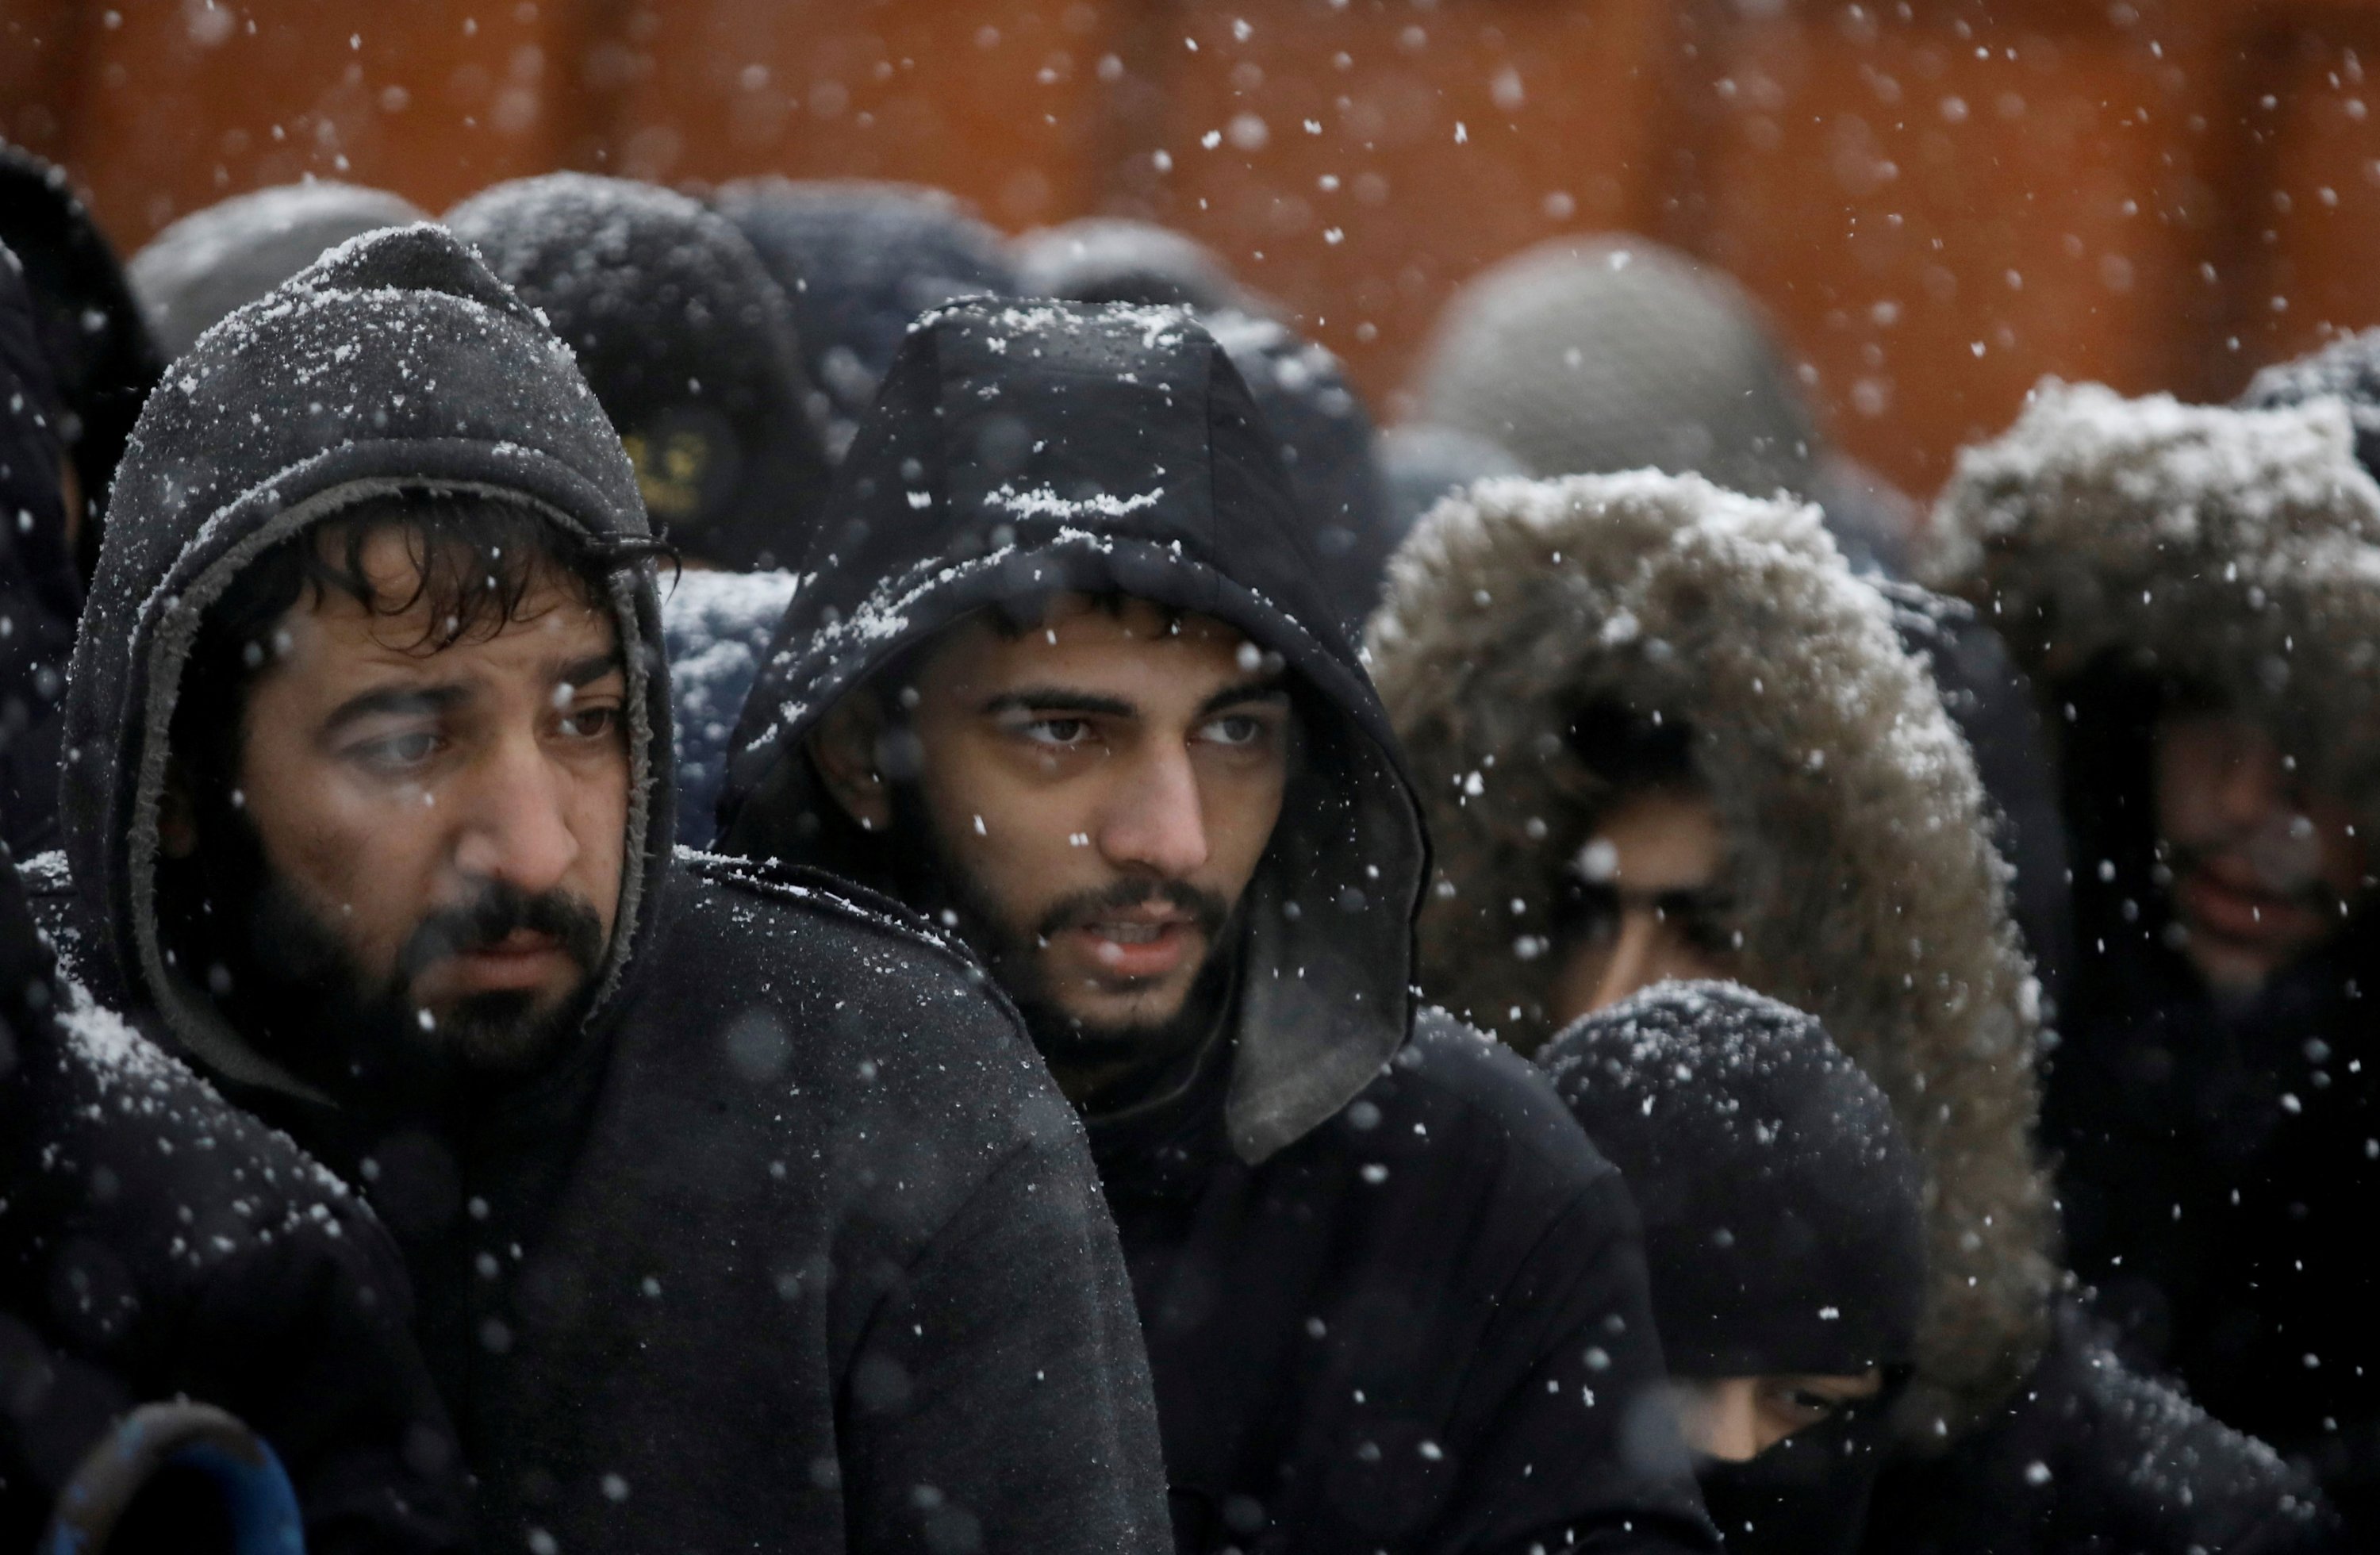 Migrants gather during snowfall at a transport and logistics center near the Belarusian-Polish border in the Grodno region, Belarus, Nov. 23, 2021. (Reuters Photo)